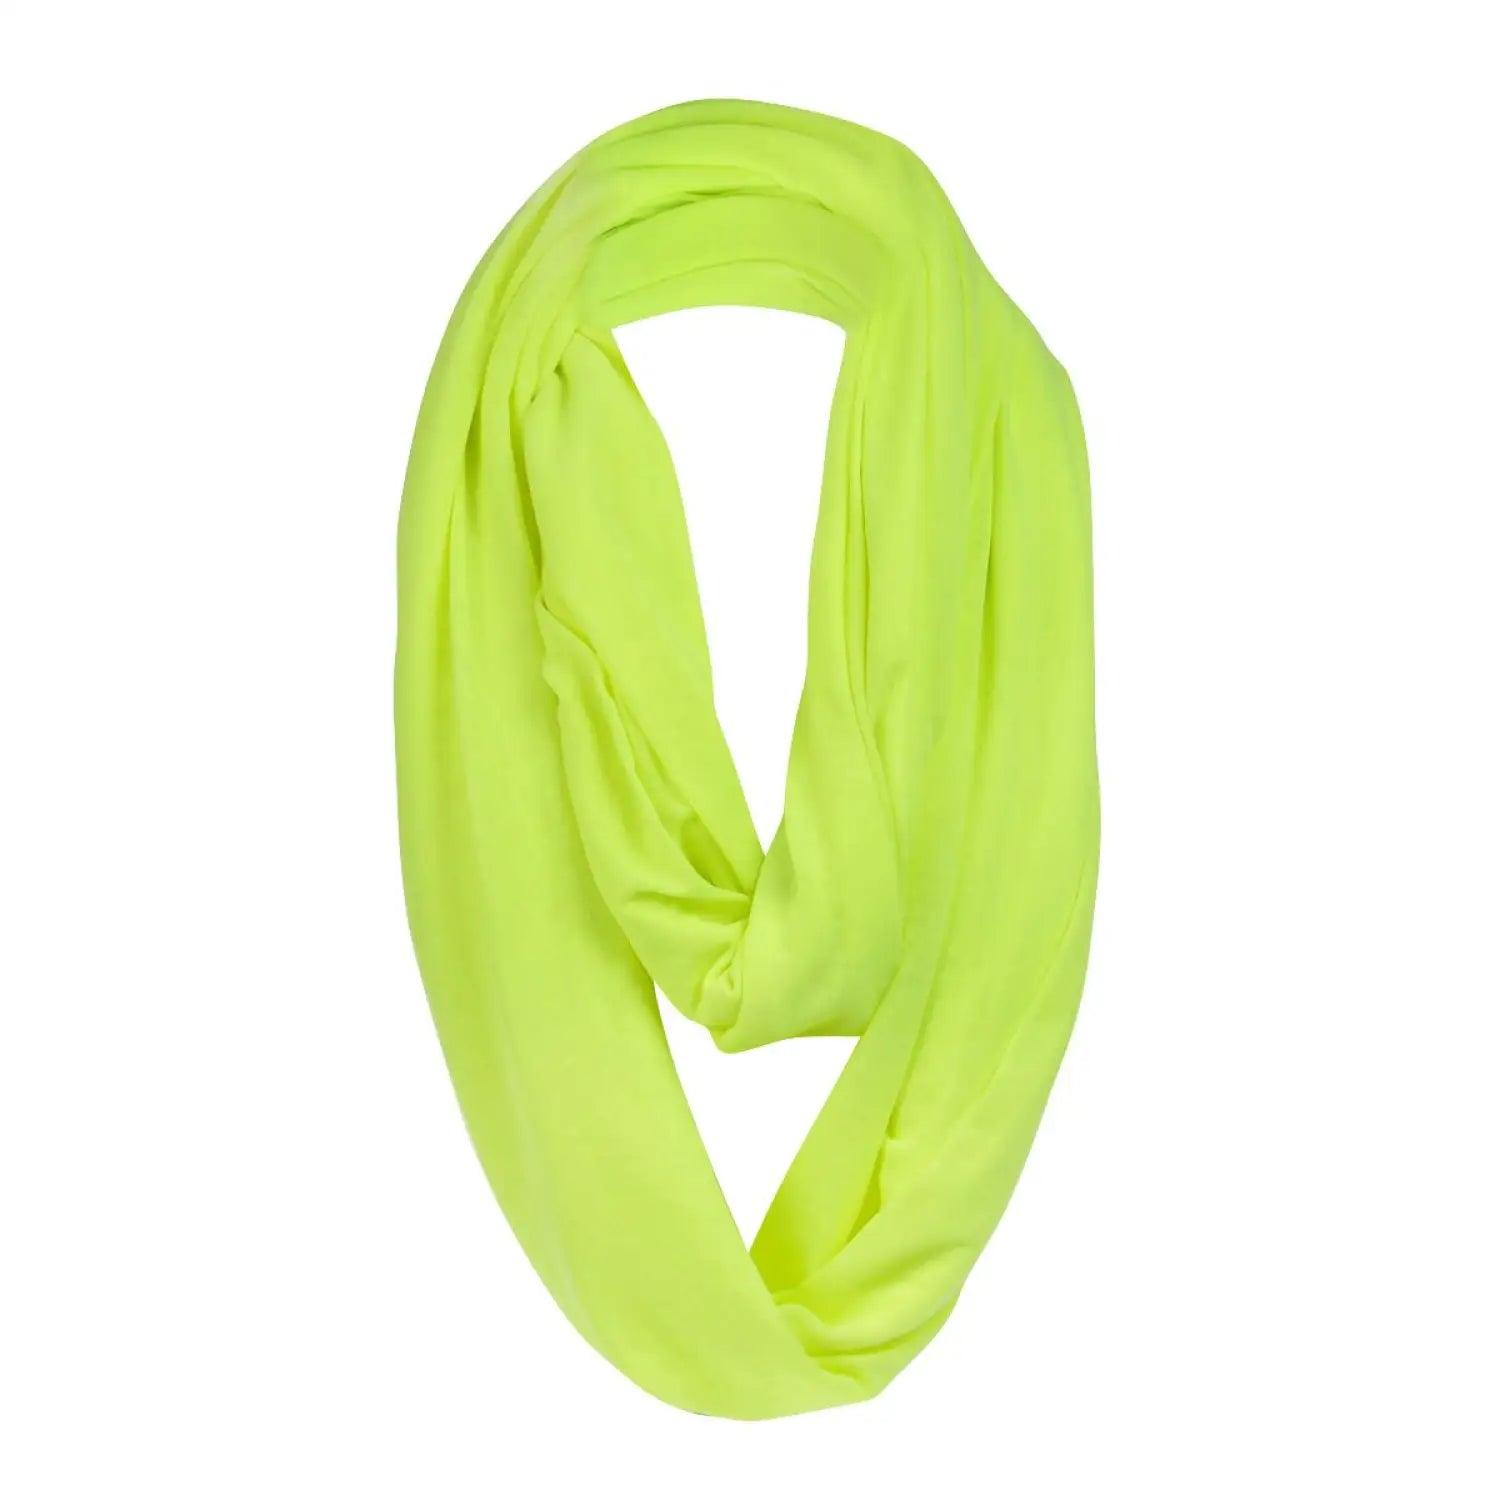 Lime green jersey cotton infinity snood with soft, seamless design